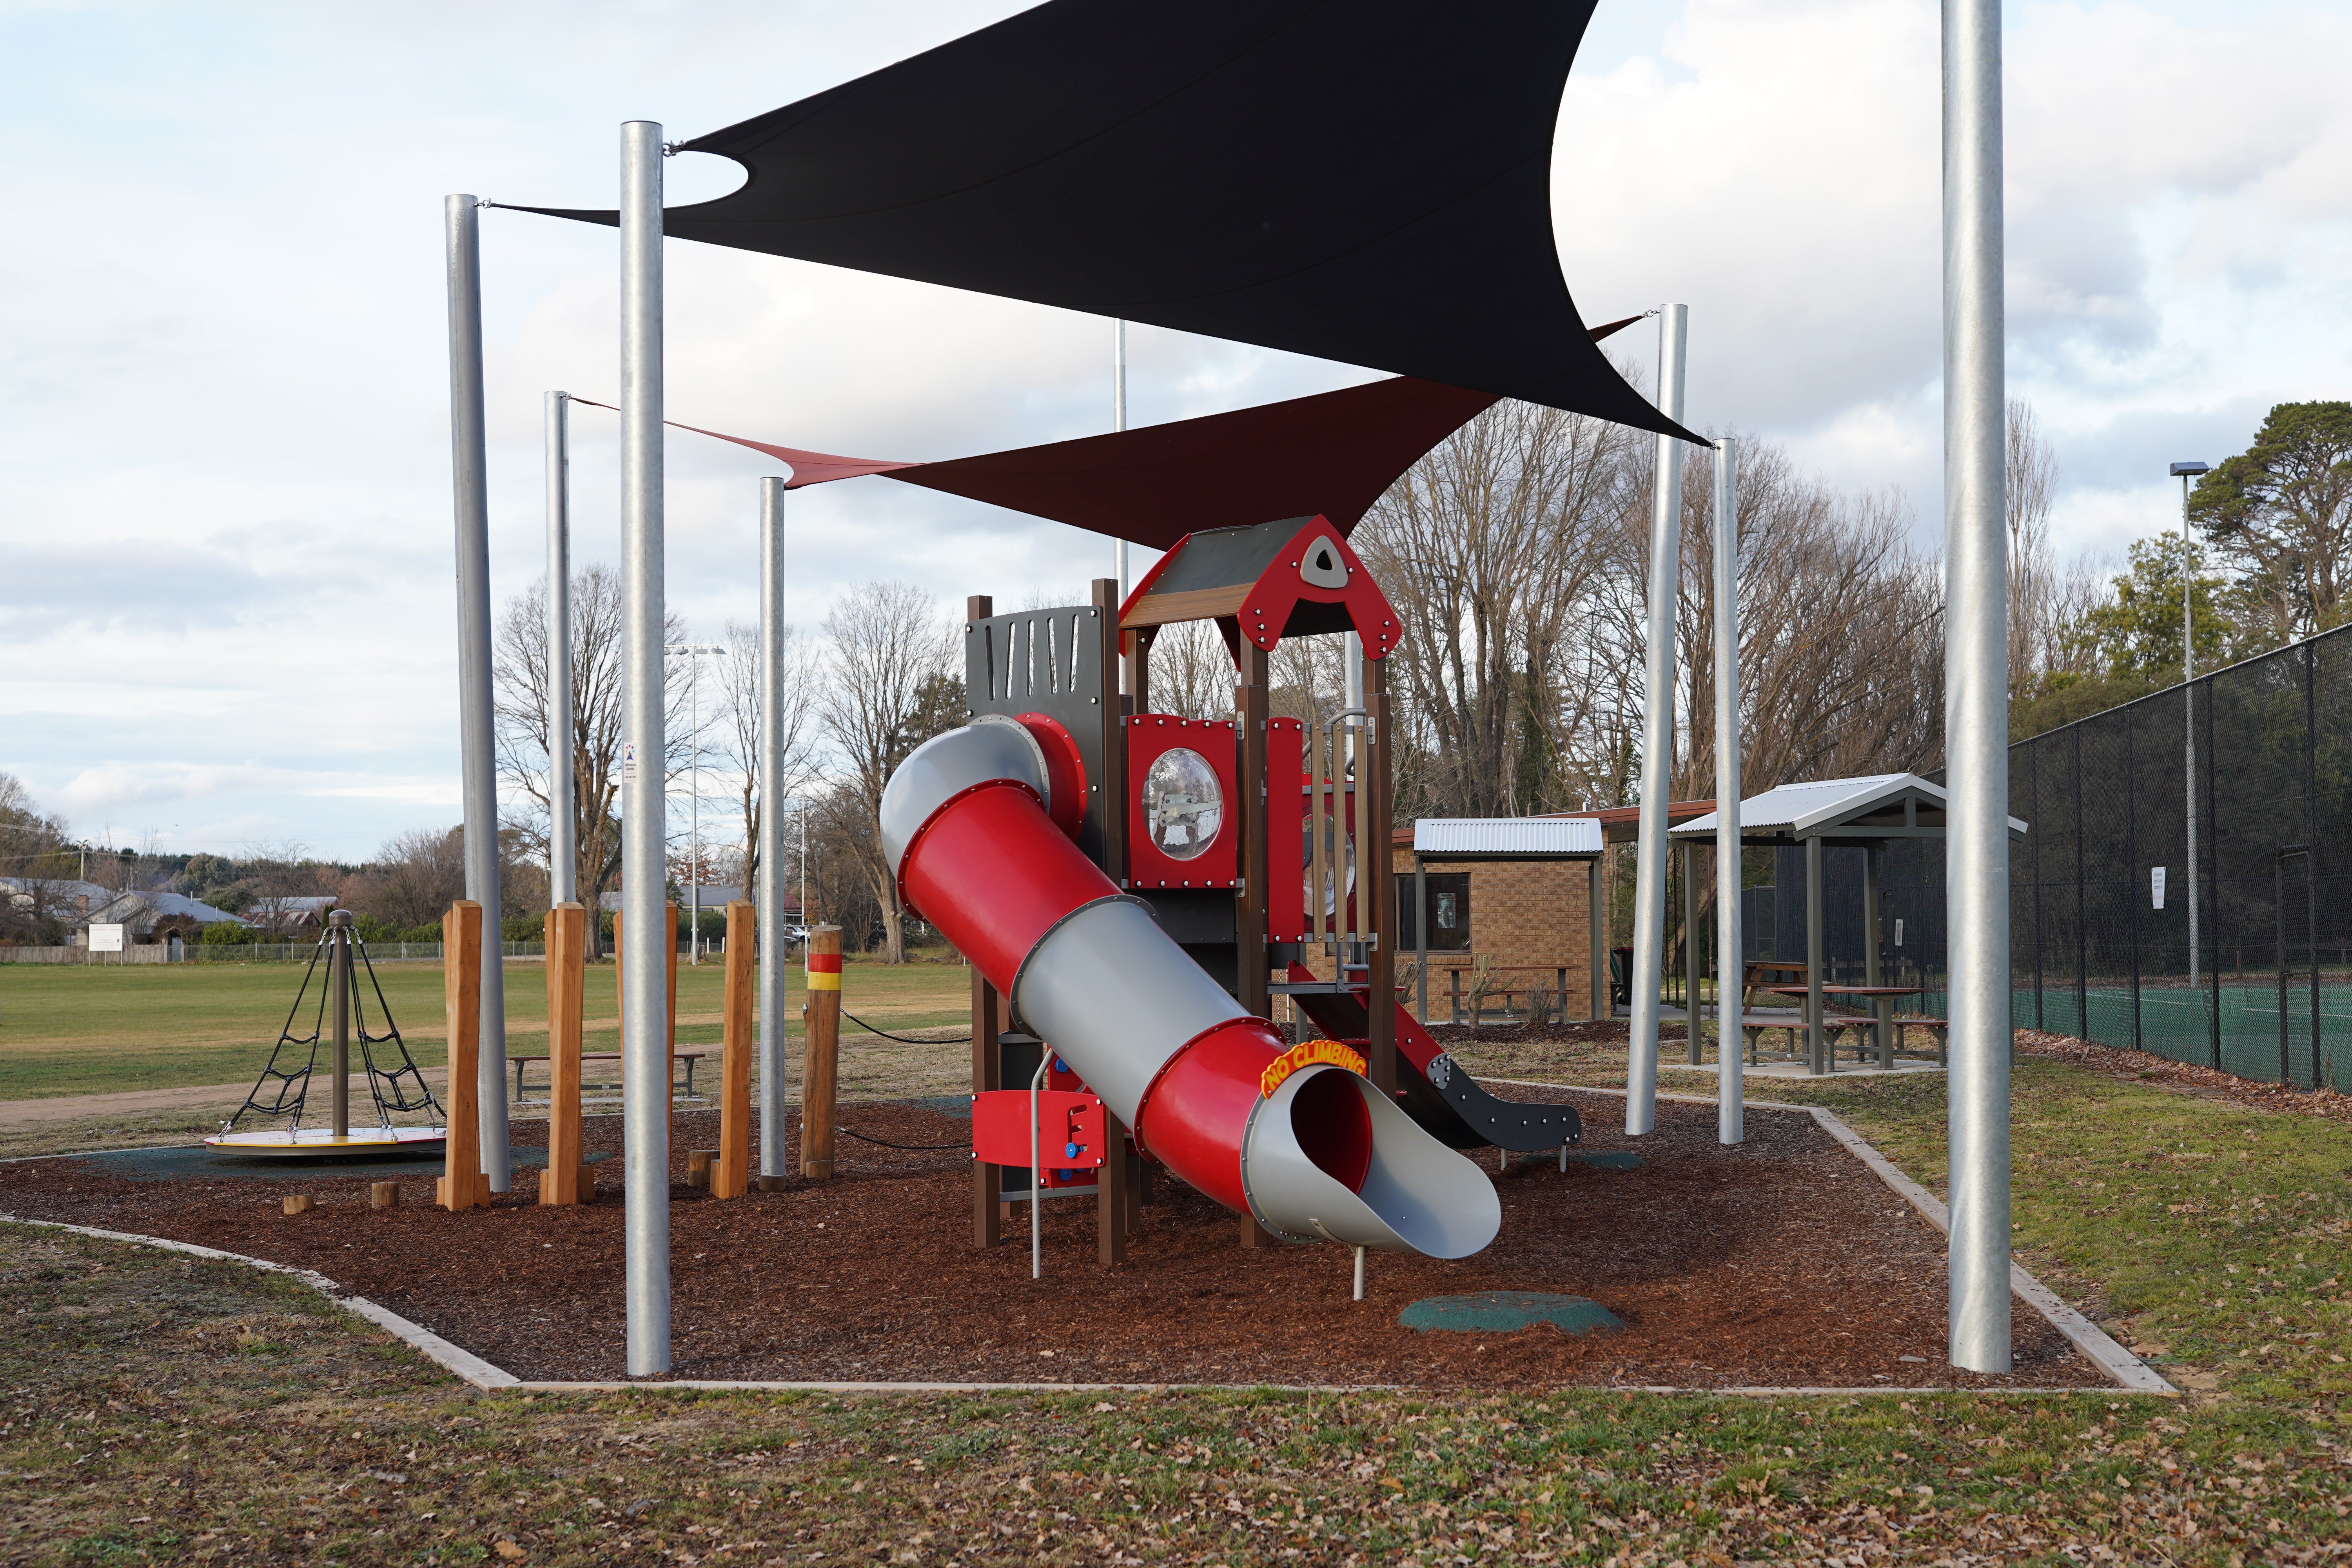 Braidwood Recreation Grounds and Playground - Attractions Sydney